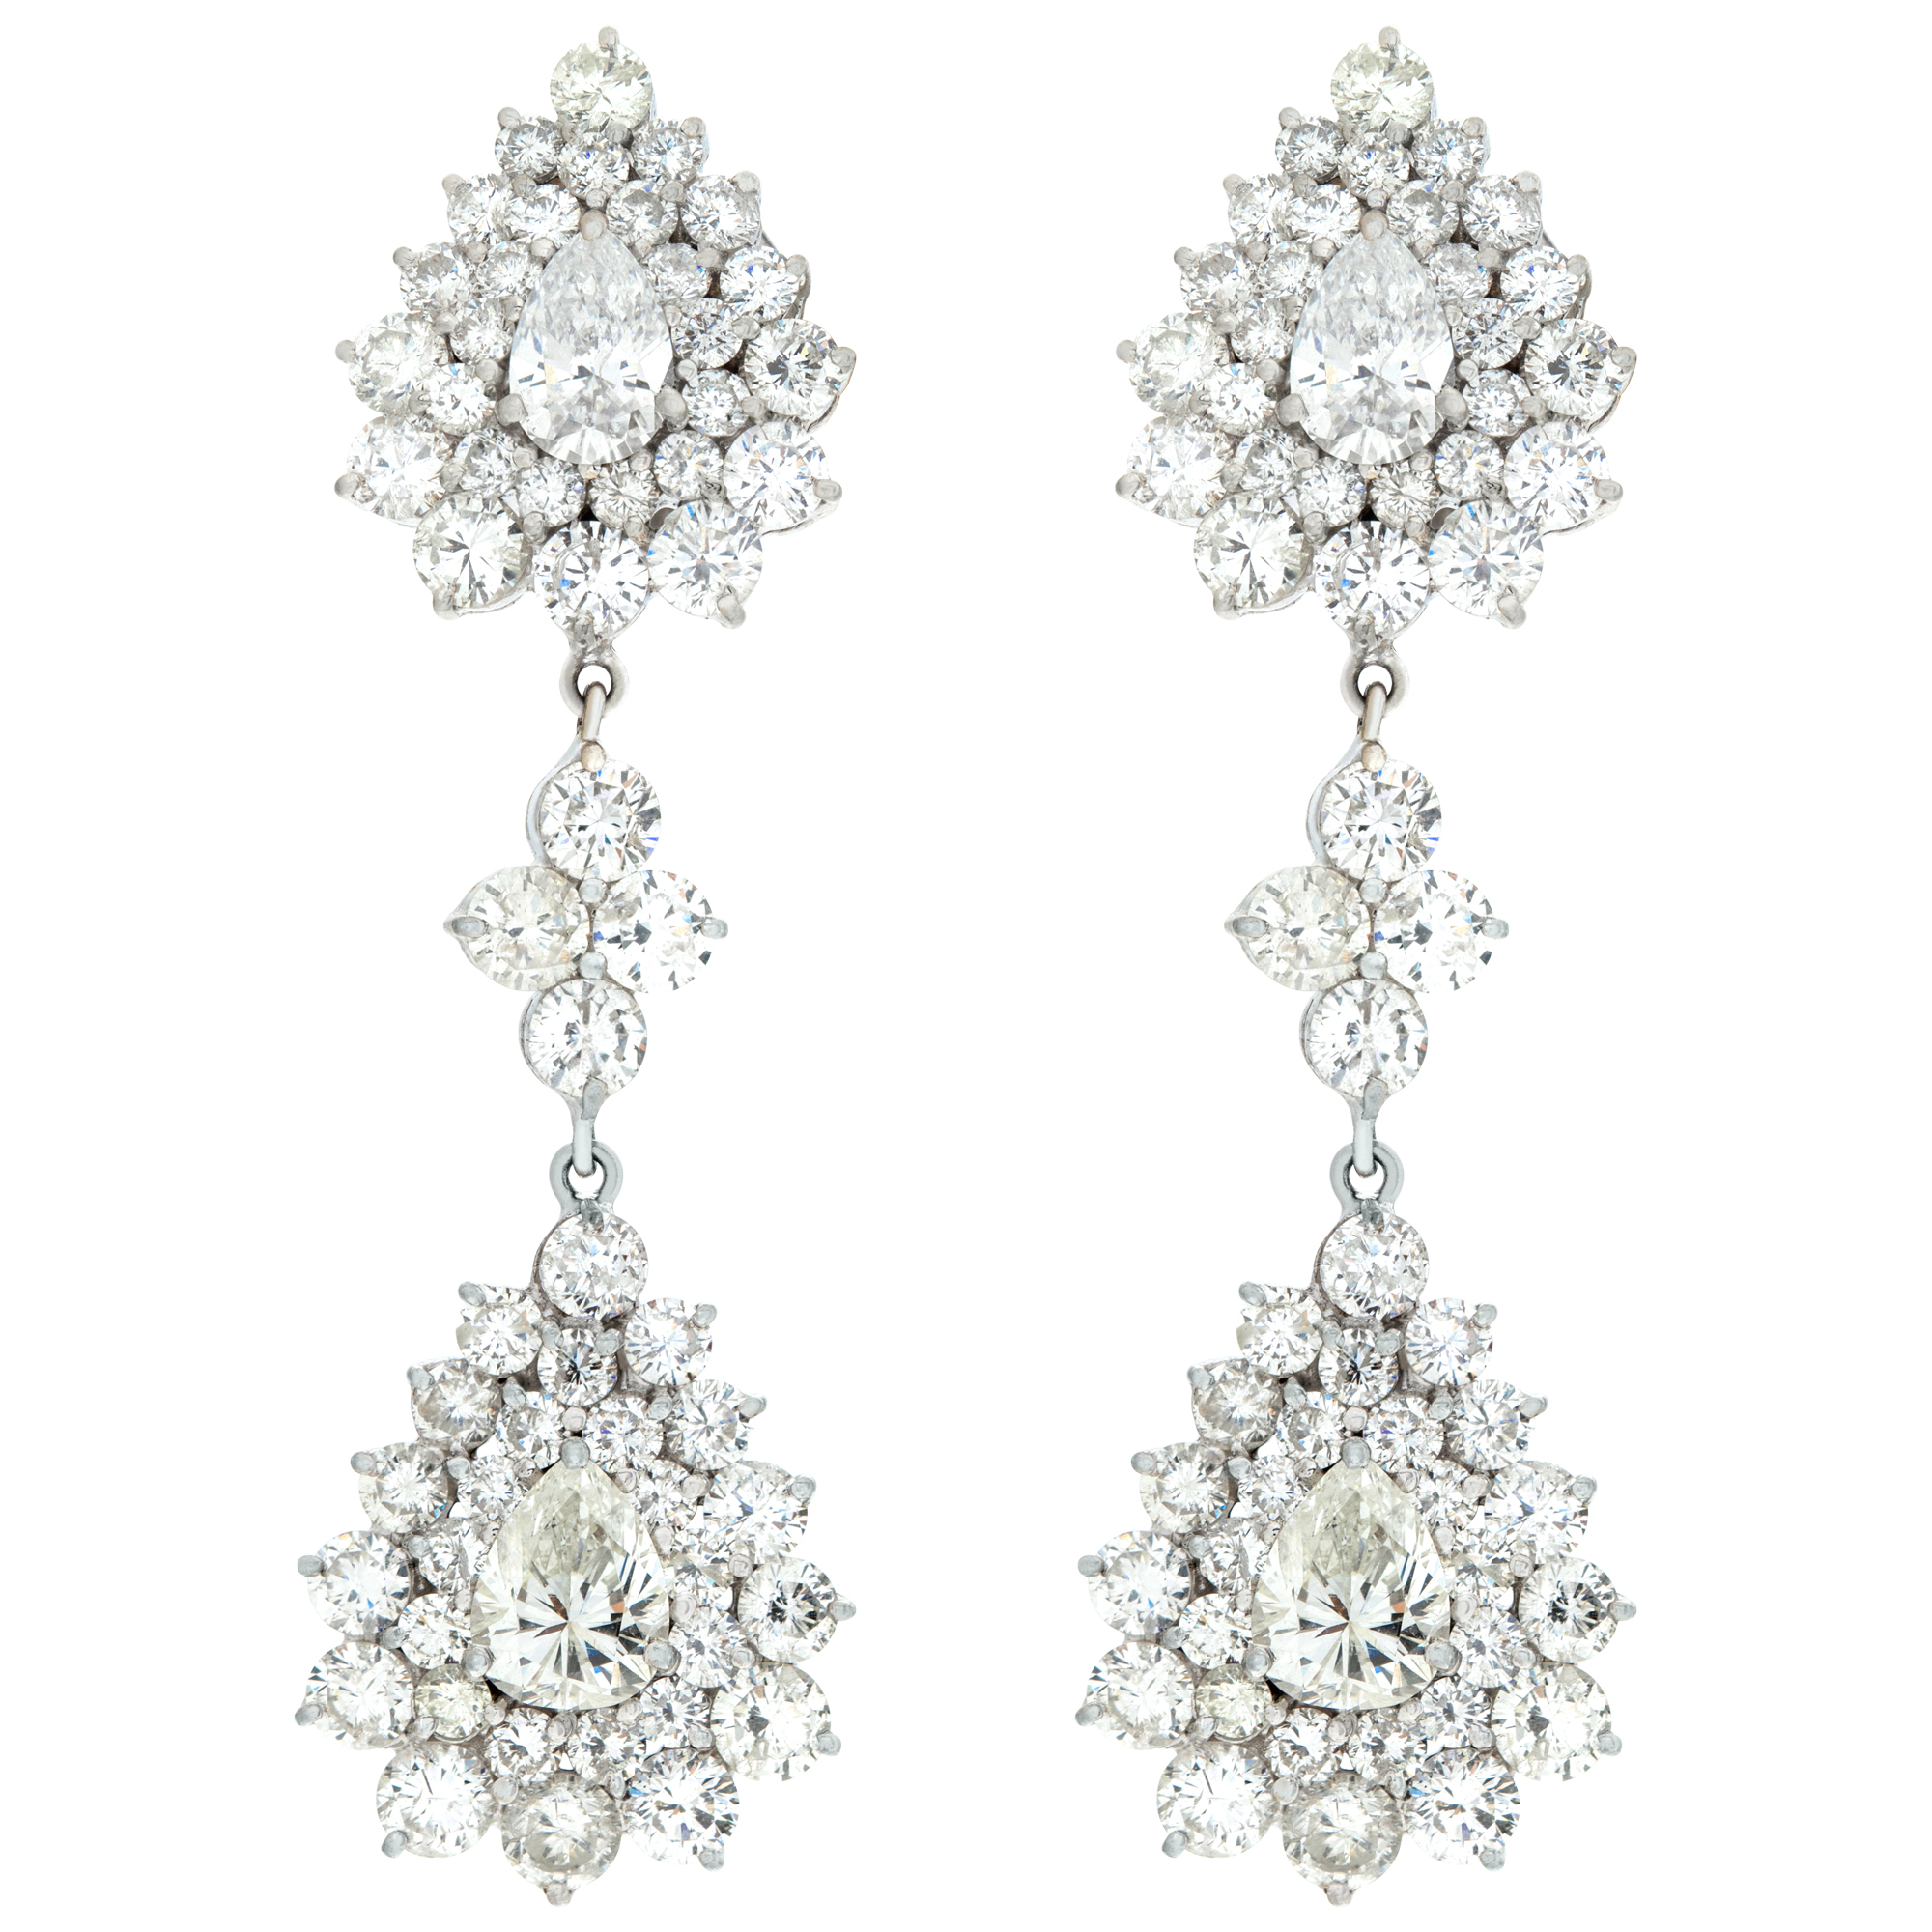 Stunning 18k white gold drop earrings with 10.31 carats in round and pear cut diamonds